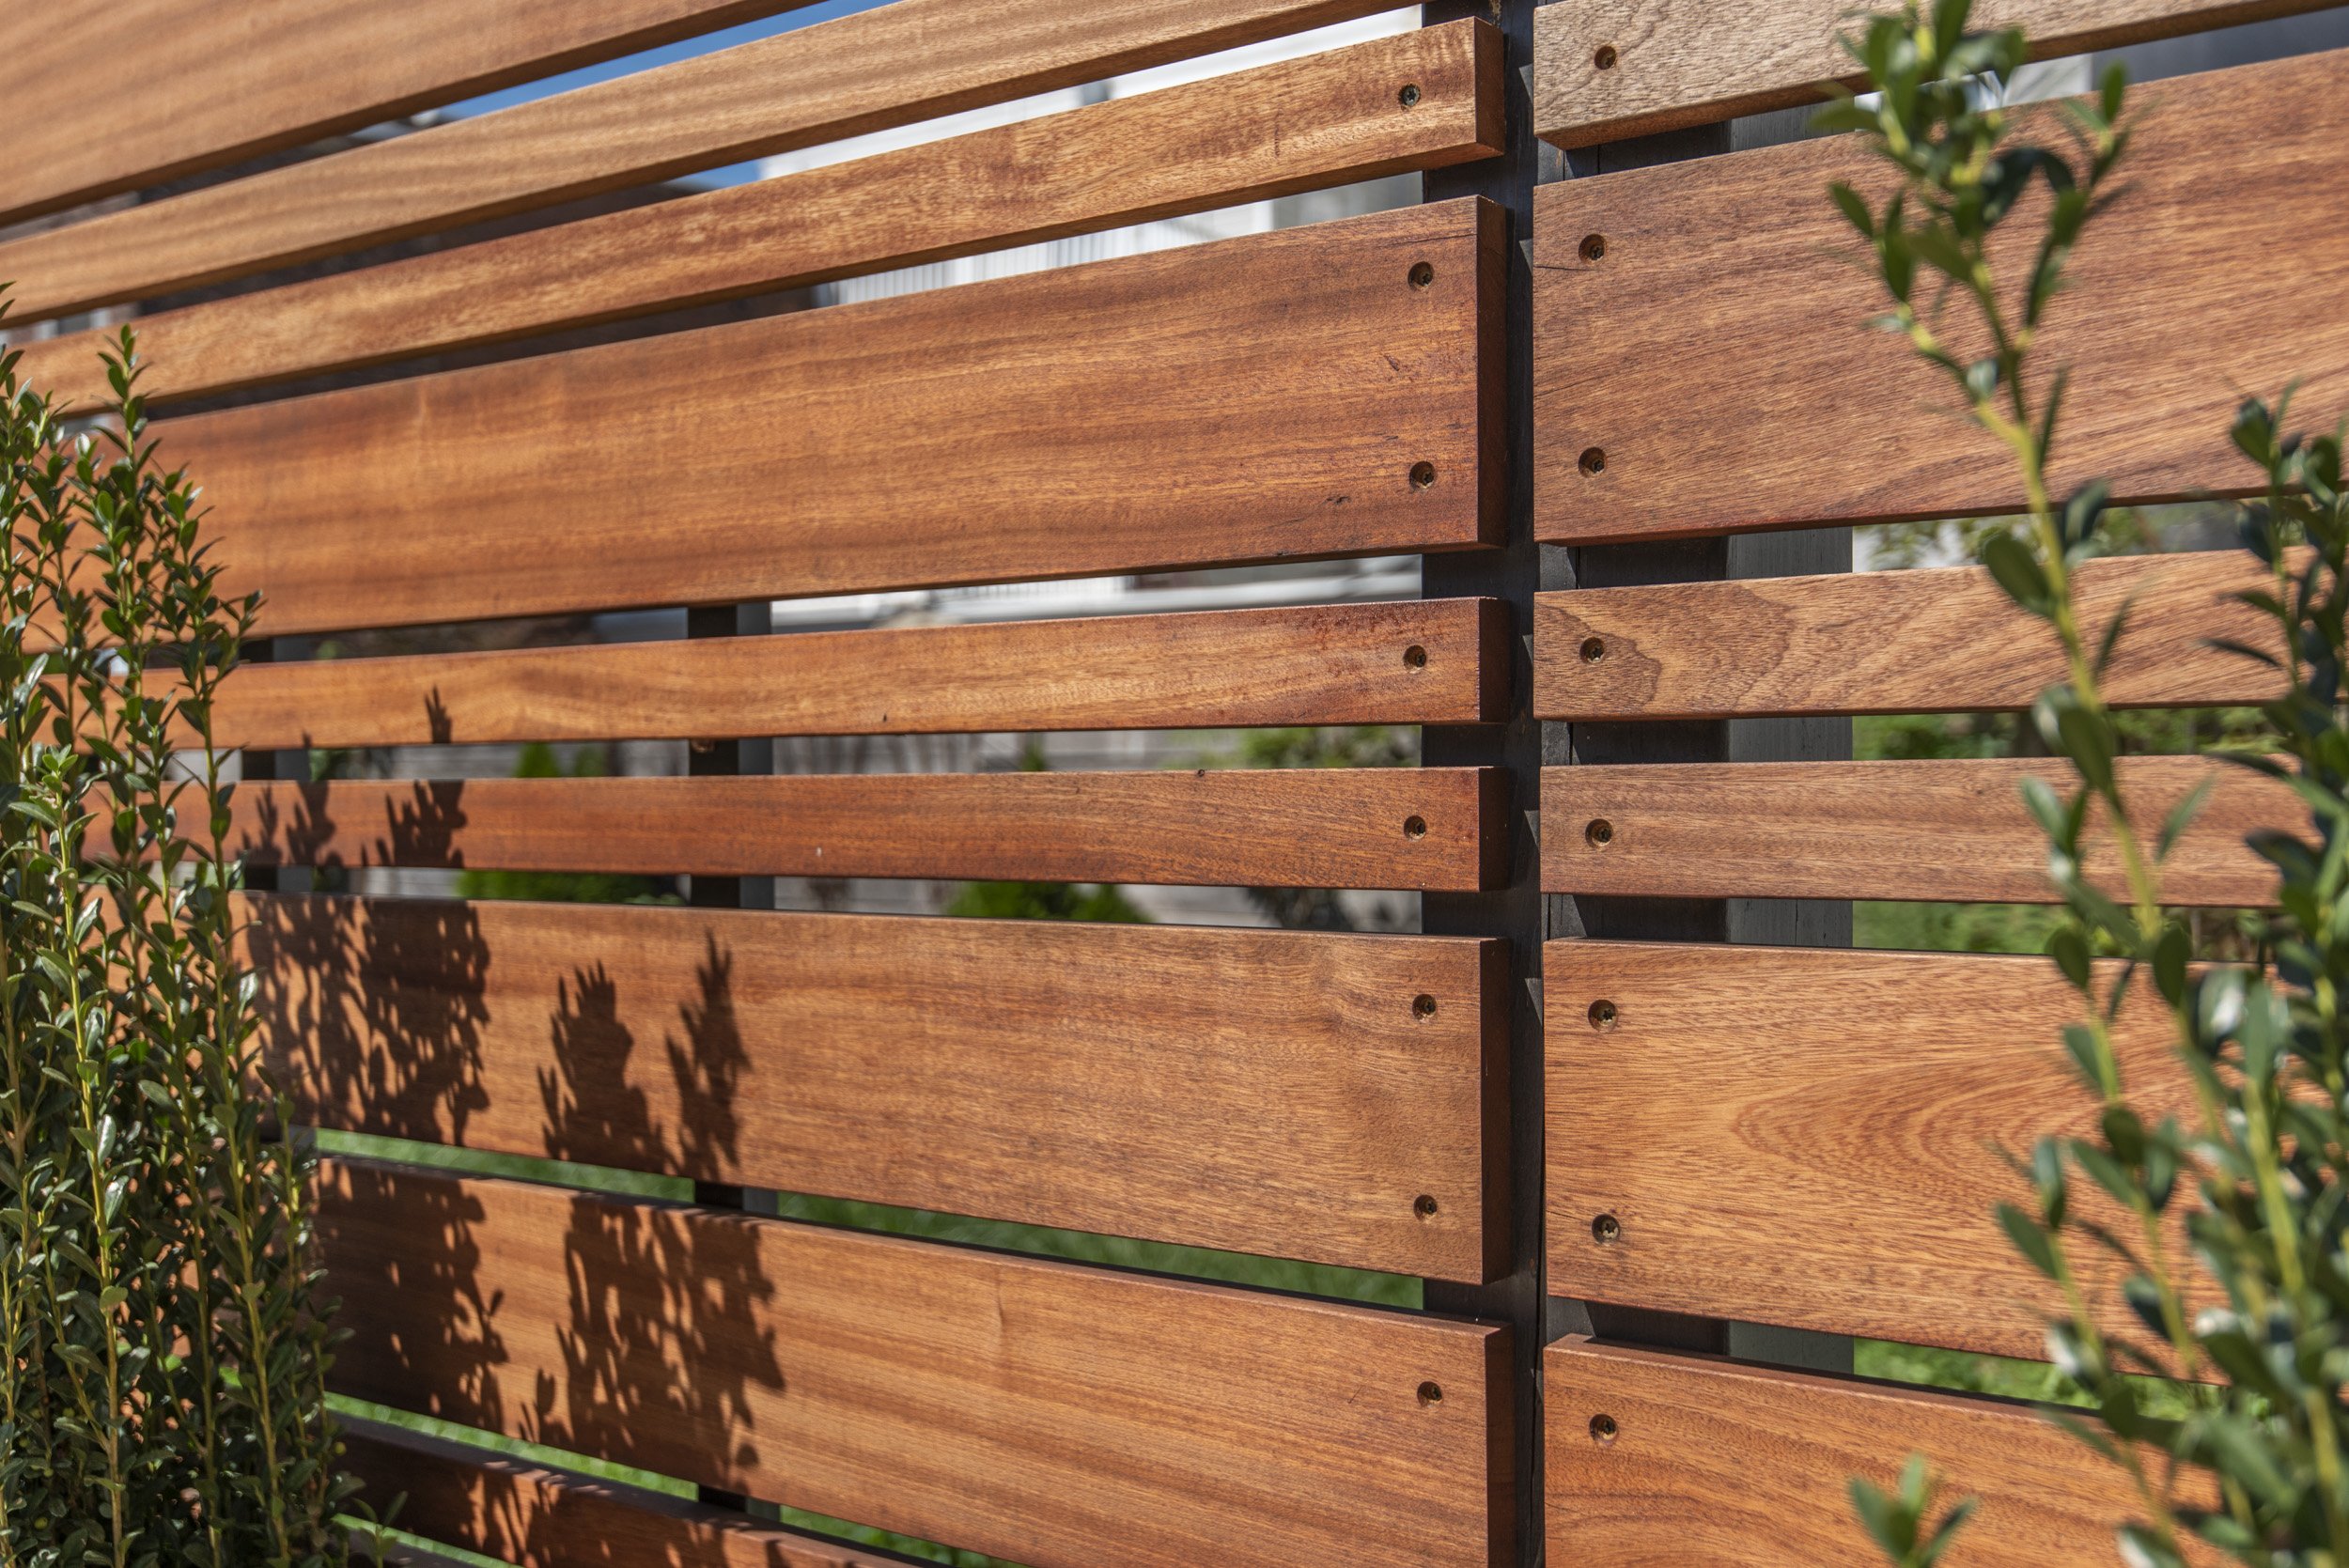  Fence design to amplify contrast in color and exhibit precision craftsmanship. 